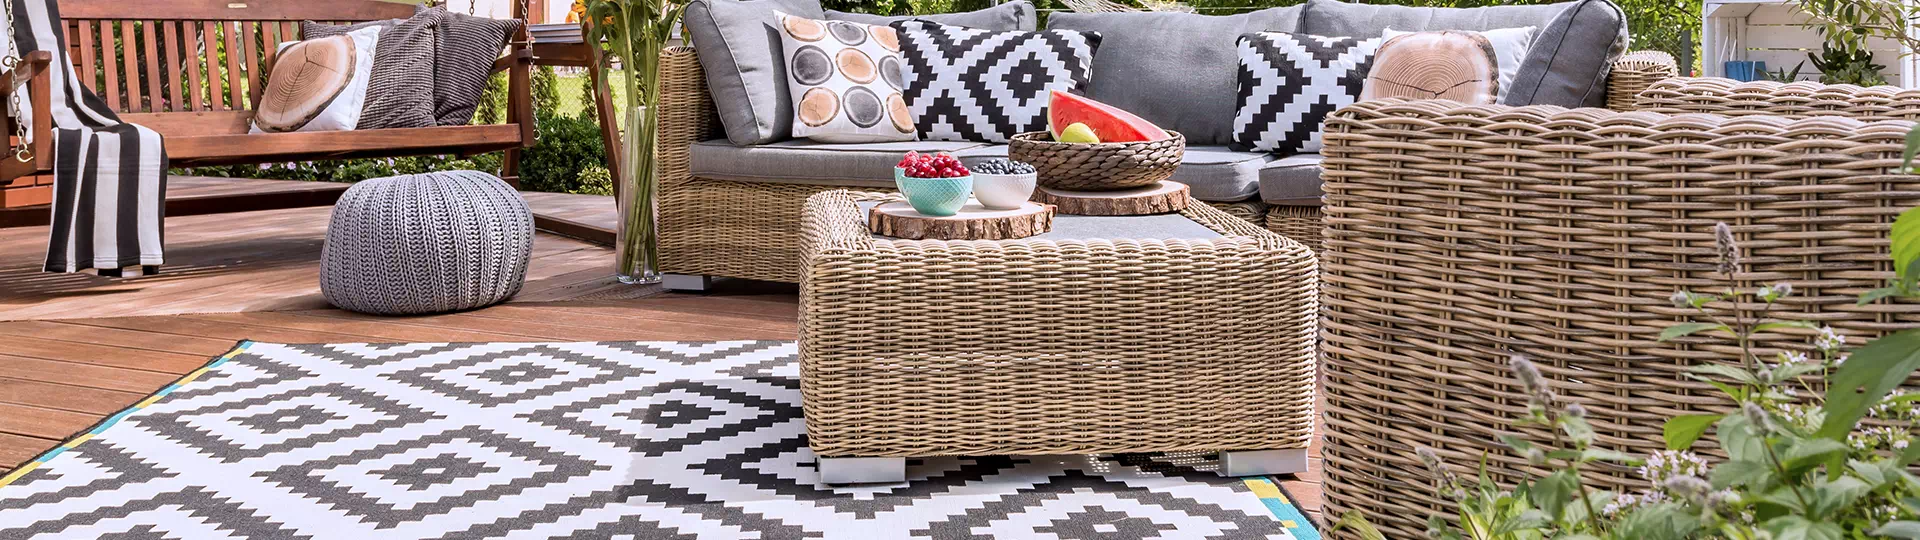 How To Clean An Outdoor Rug Simple Green, How To Keep Outdoor Rugs Down On Concrete Floor